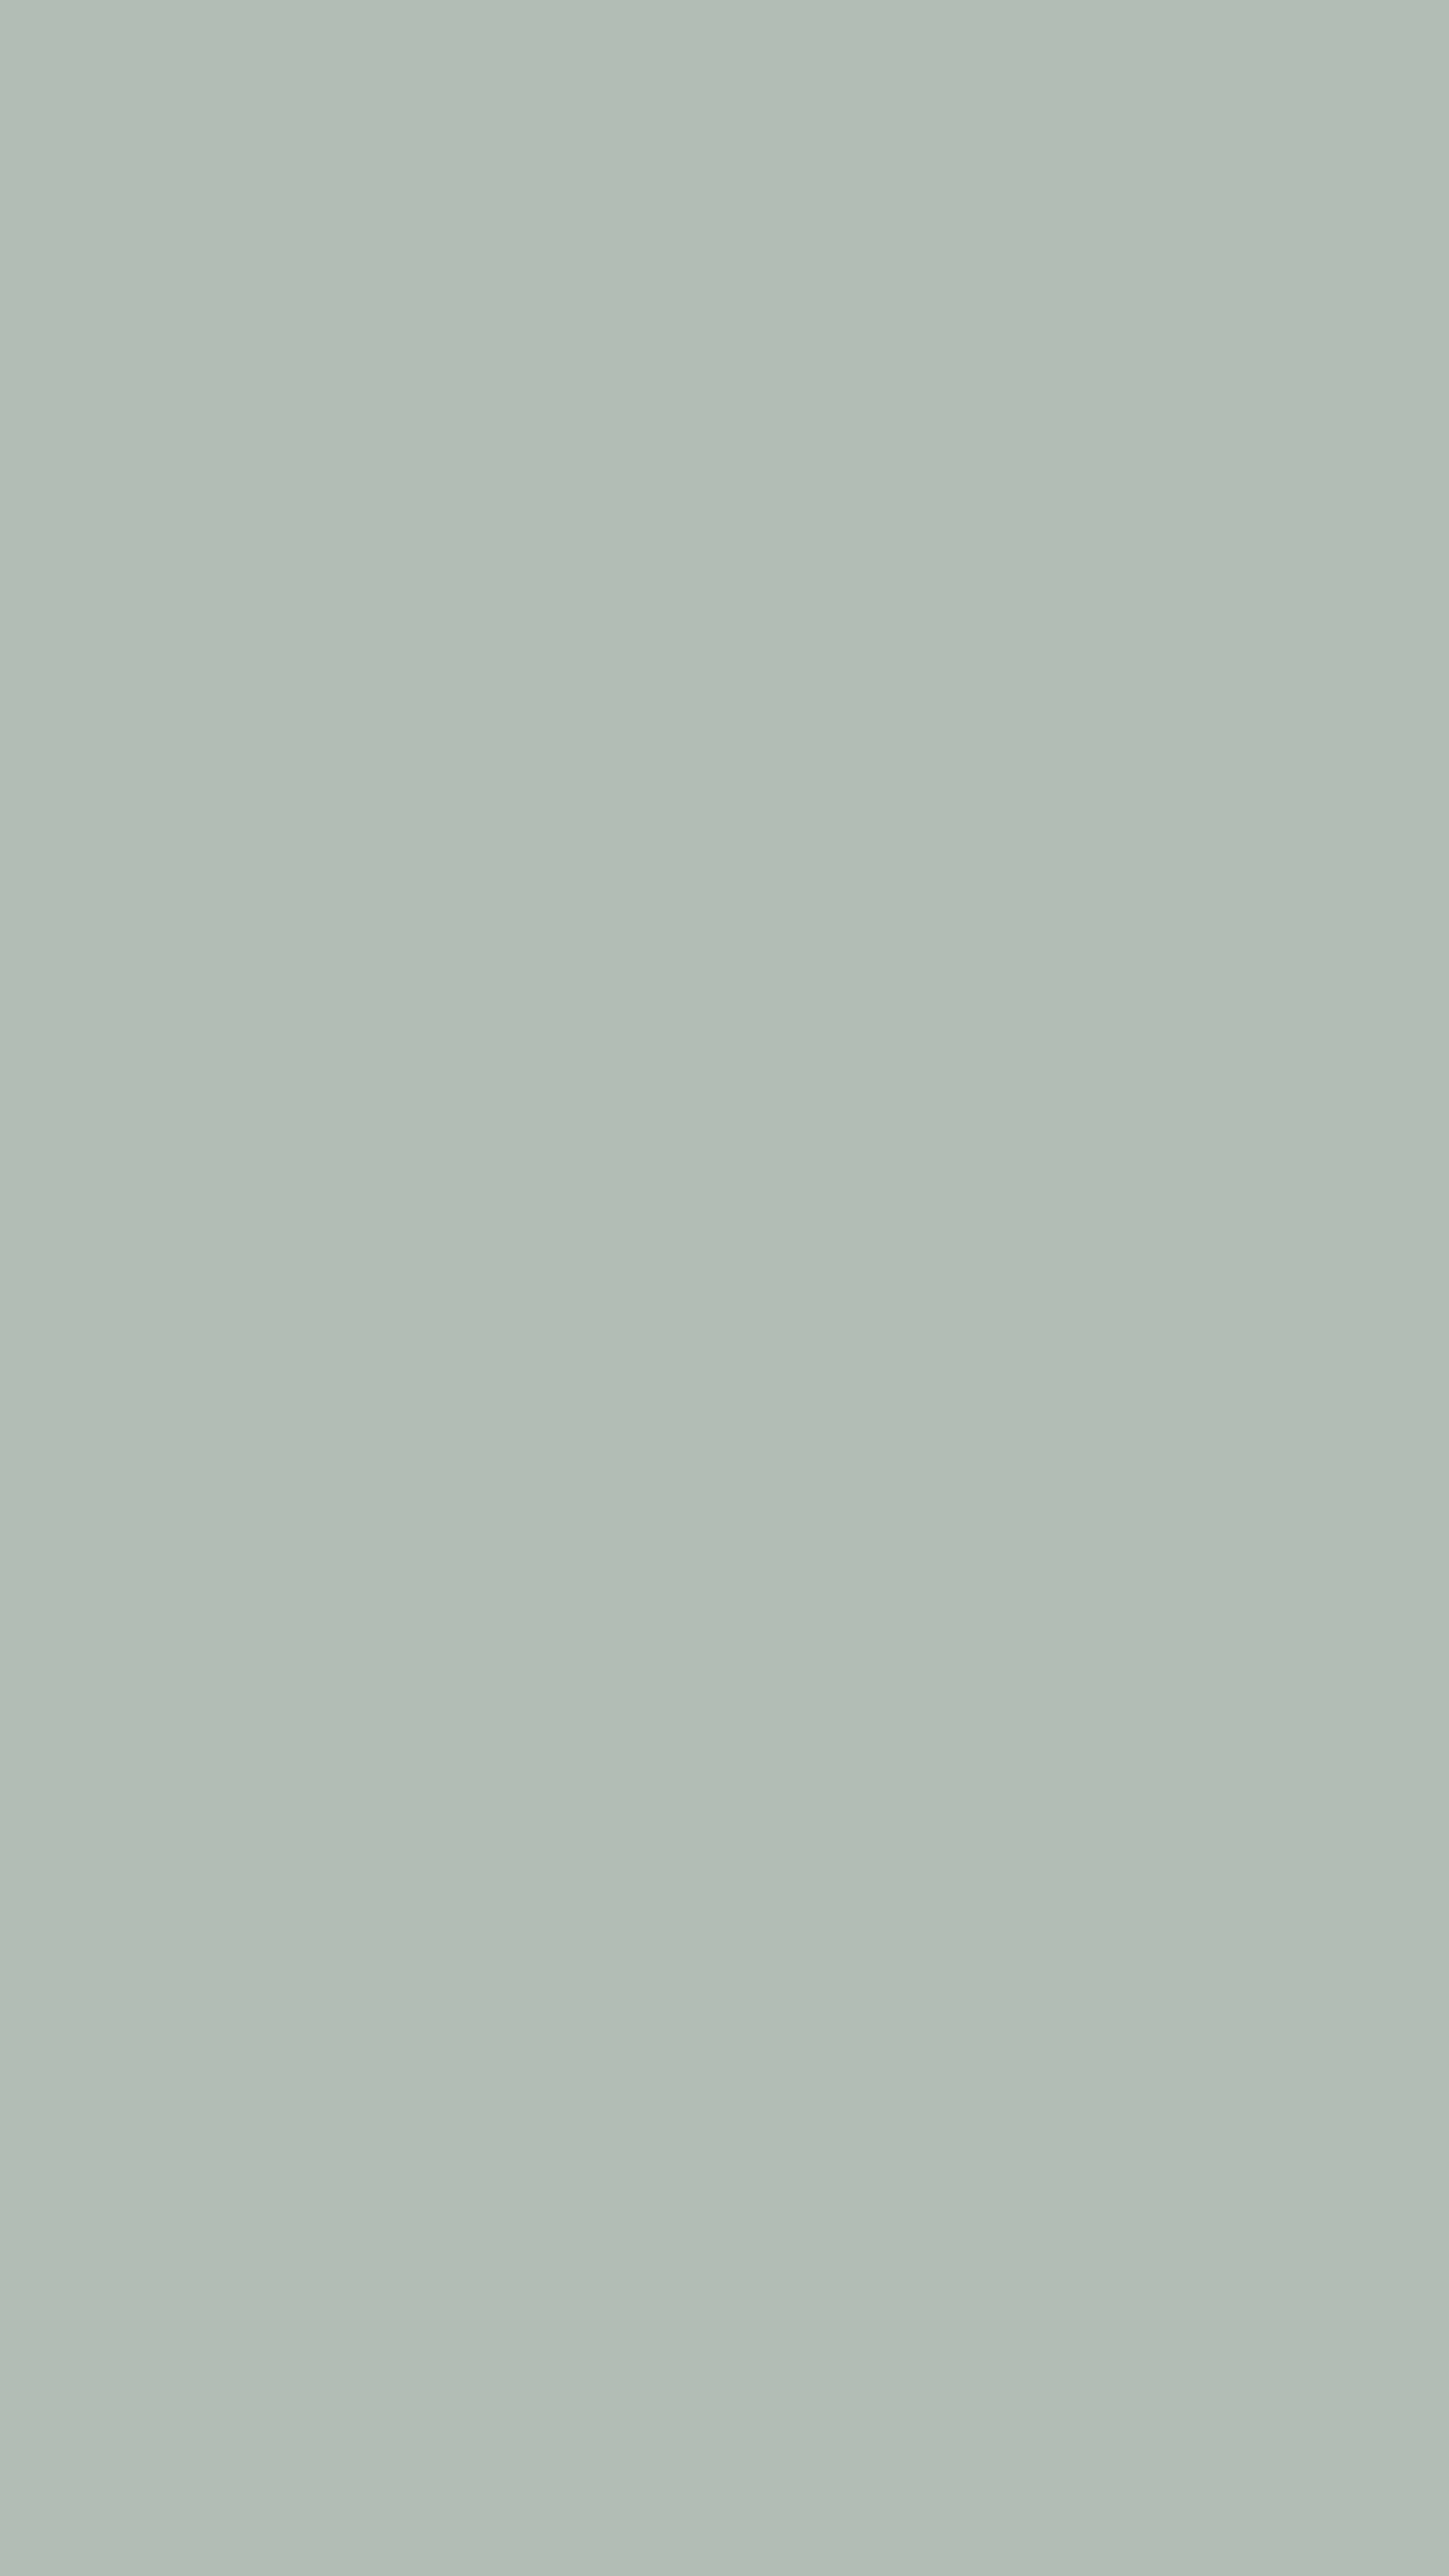 Ash Grey Solid Color Background Wallpaper for Mobile Phone